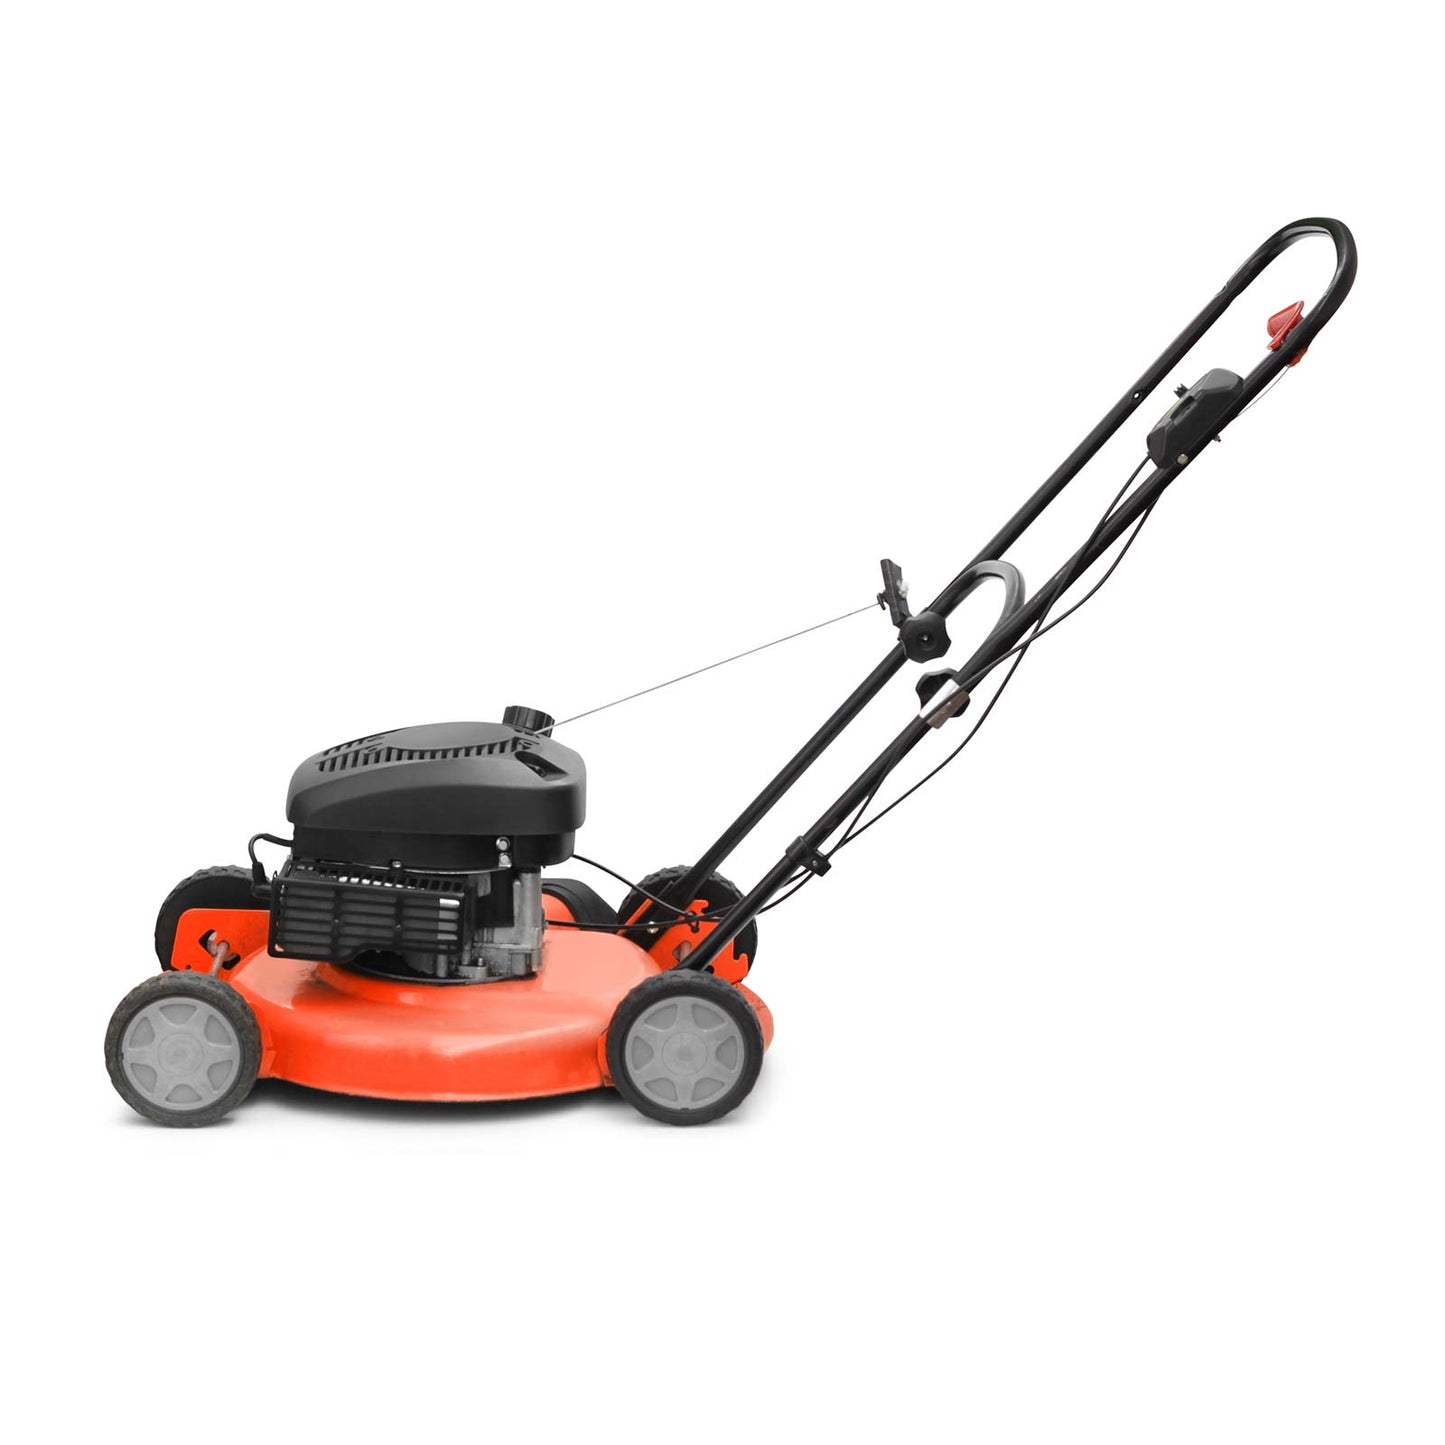 Offer For ATH460Z Lawnmower 2x18V (No Battery, No Charger), Blue MowerShop